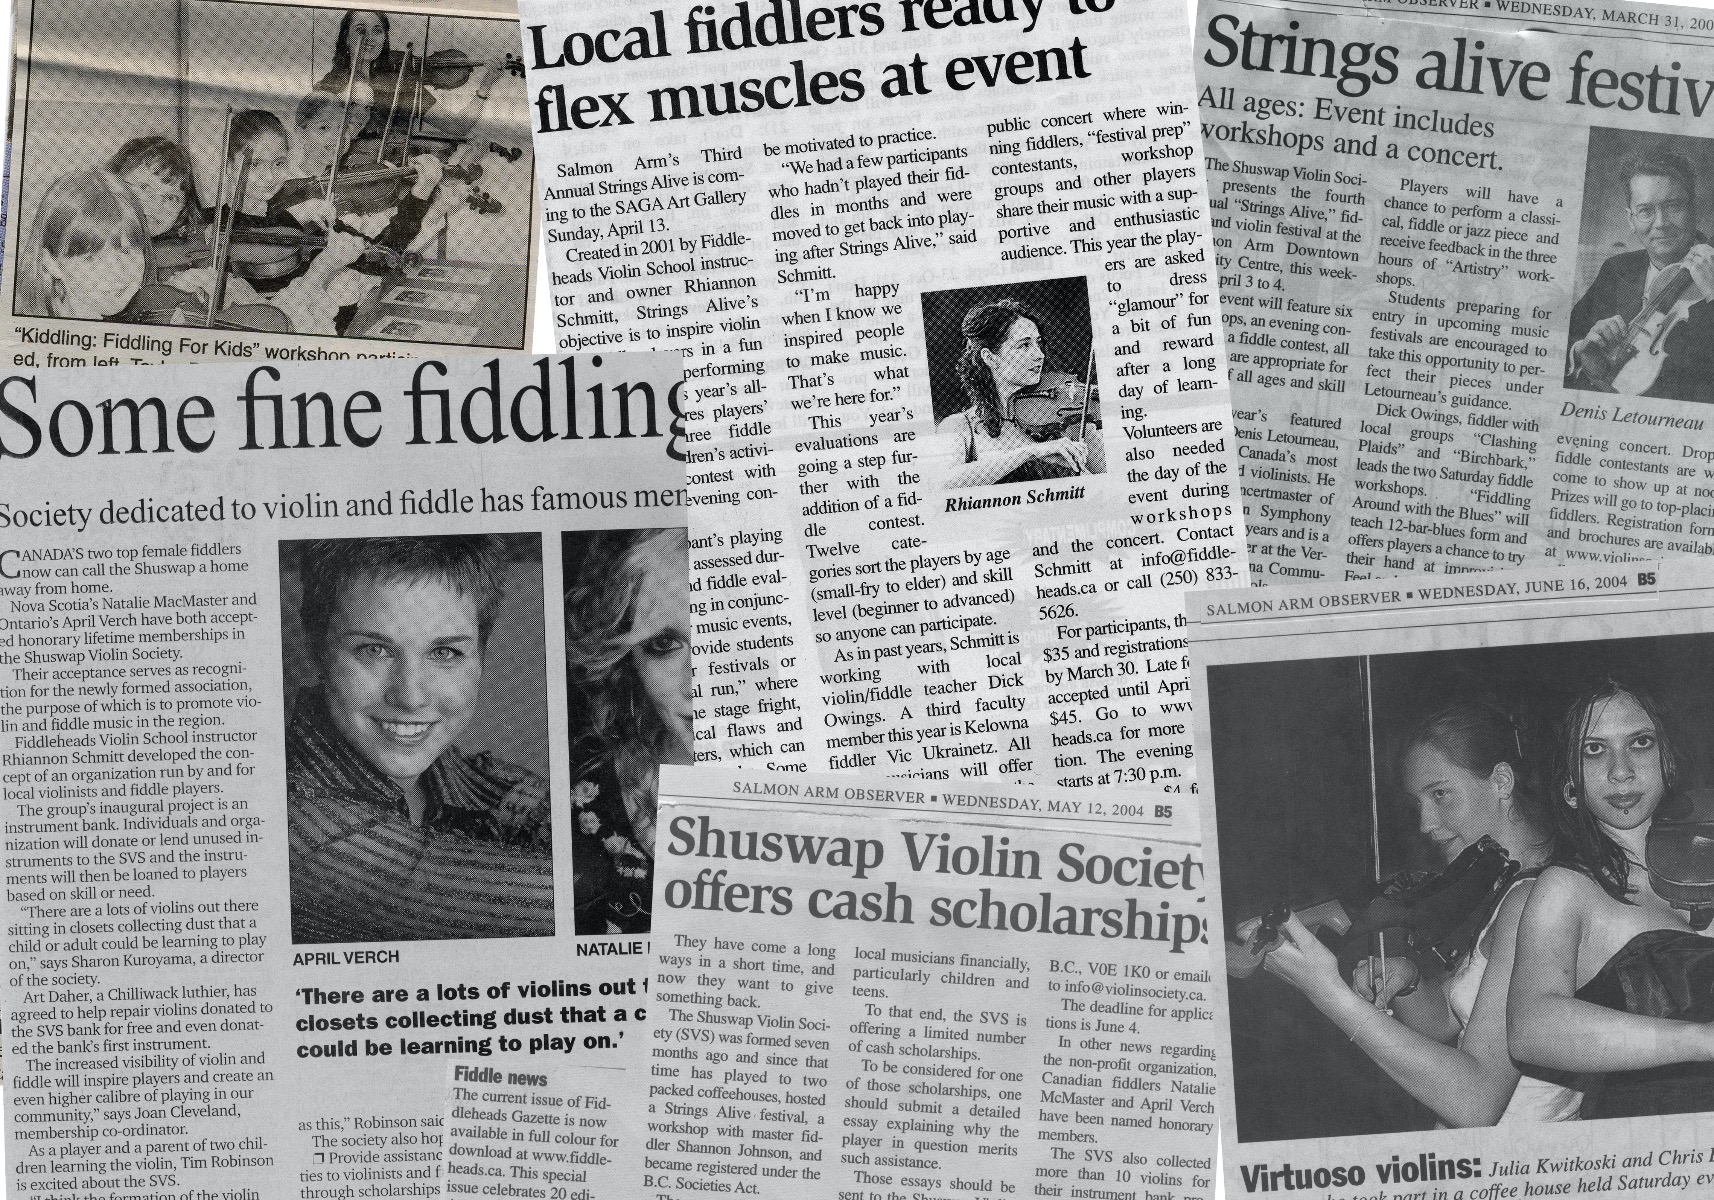 Photo: Just a sample of a few newspaper clippings from Salmon Arm, Kamloops and beyond illustrating the many programs and events offered by the Shuswap Violin Society.